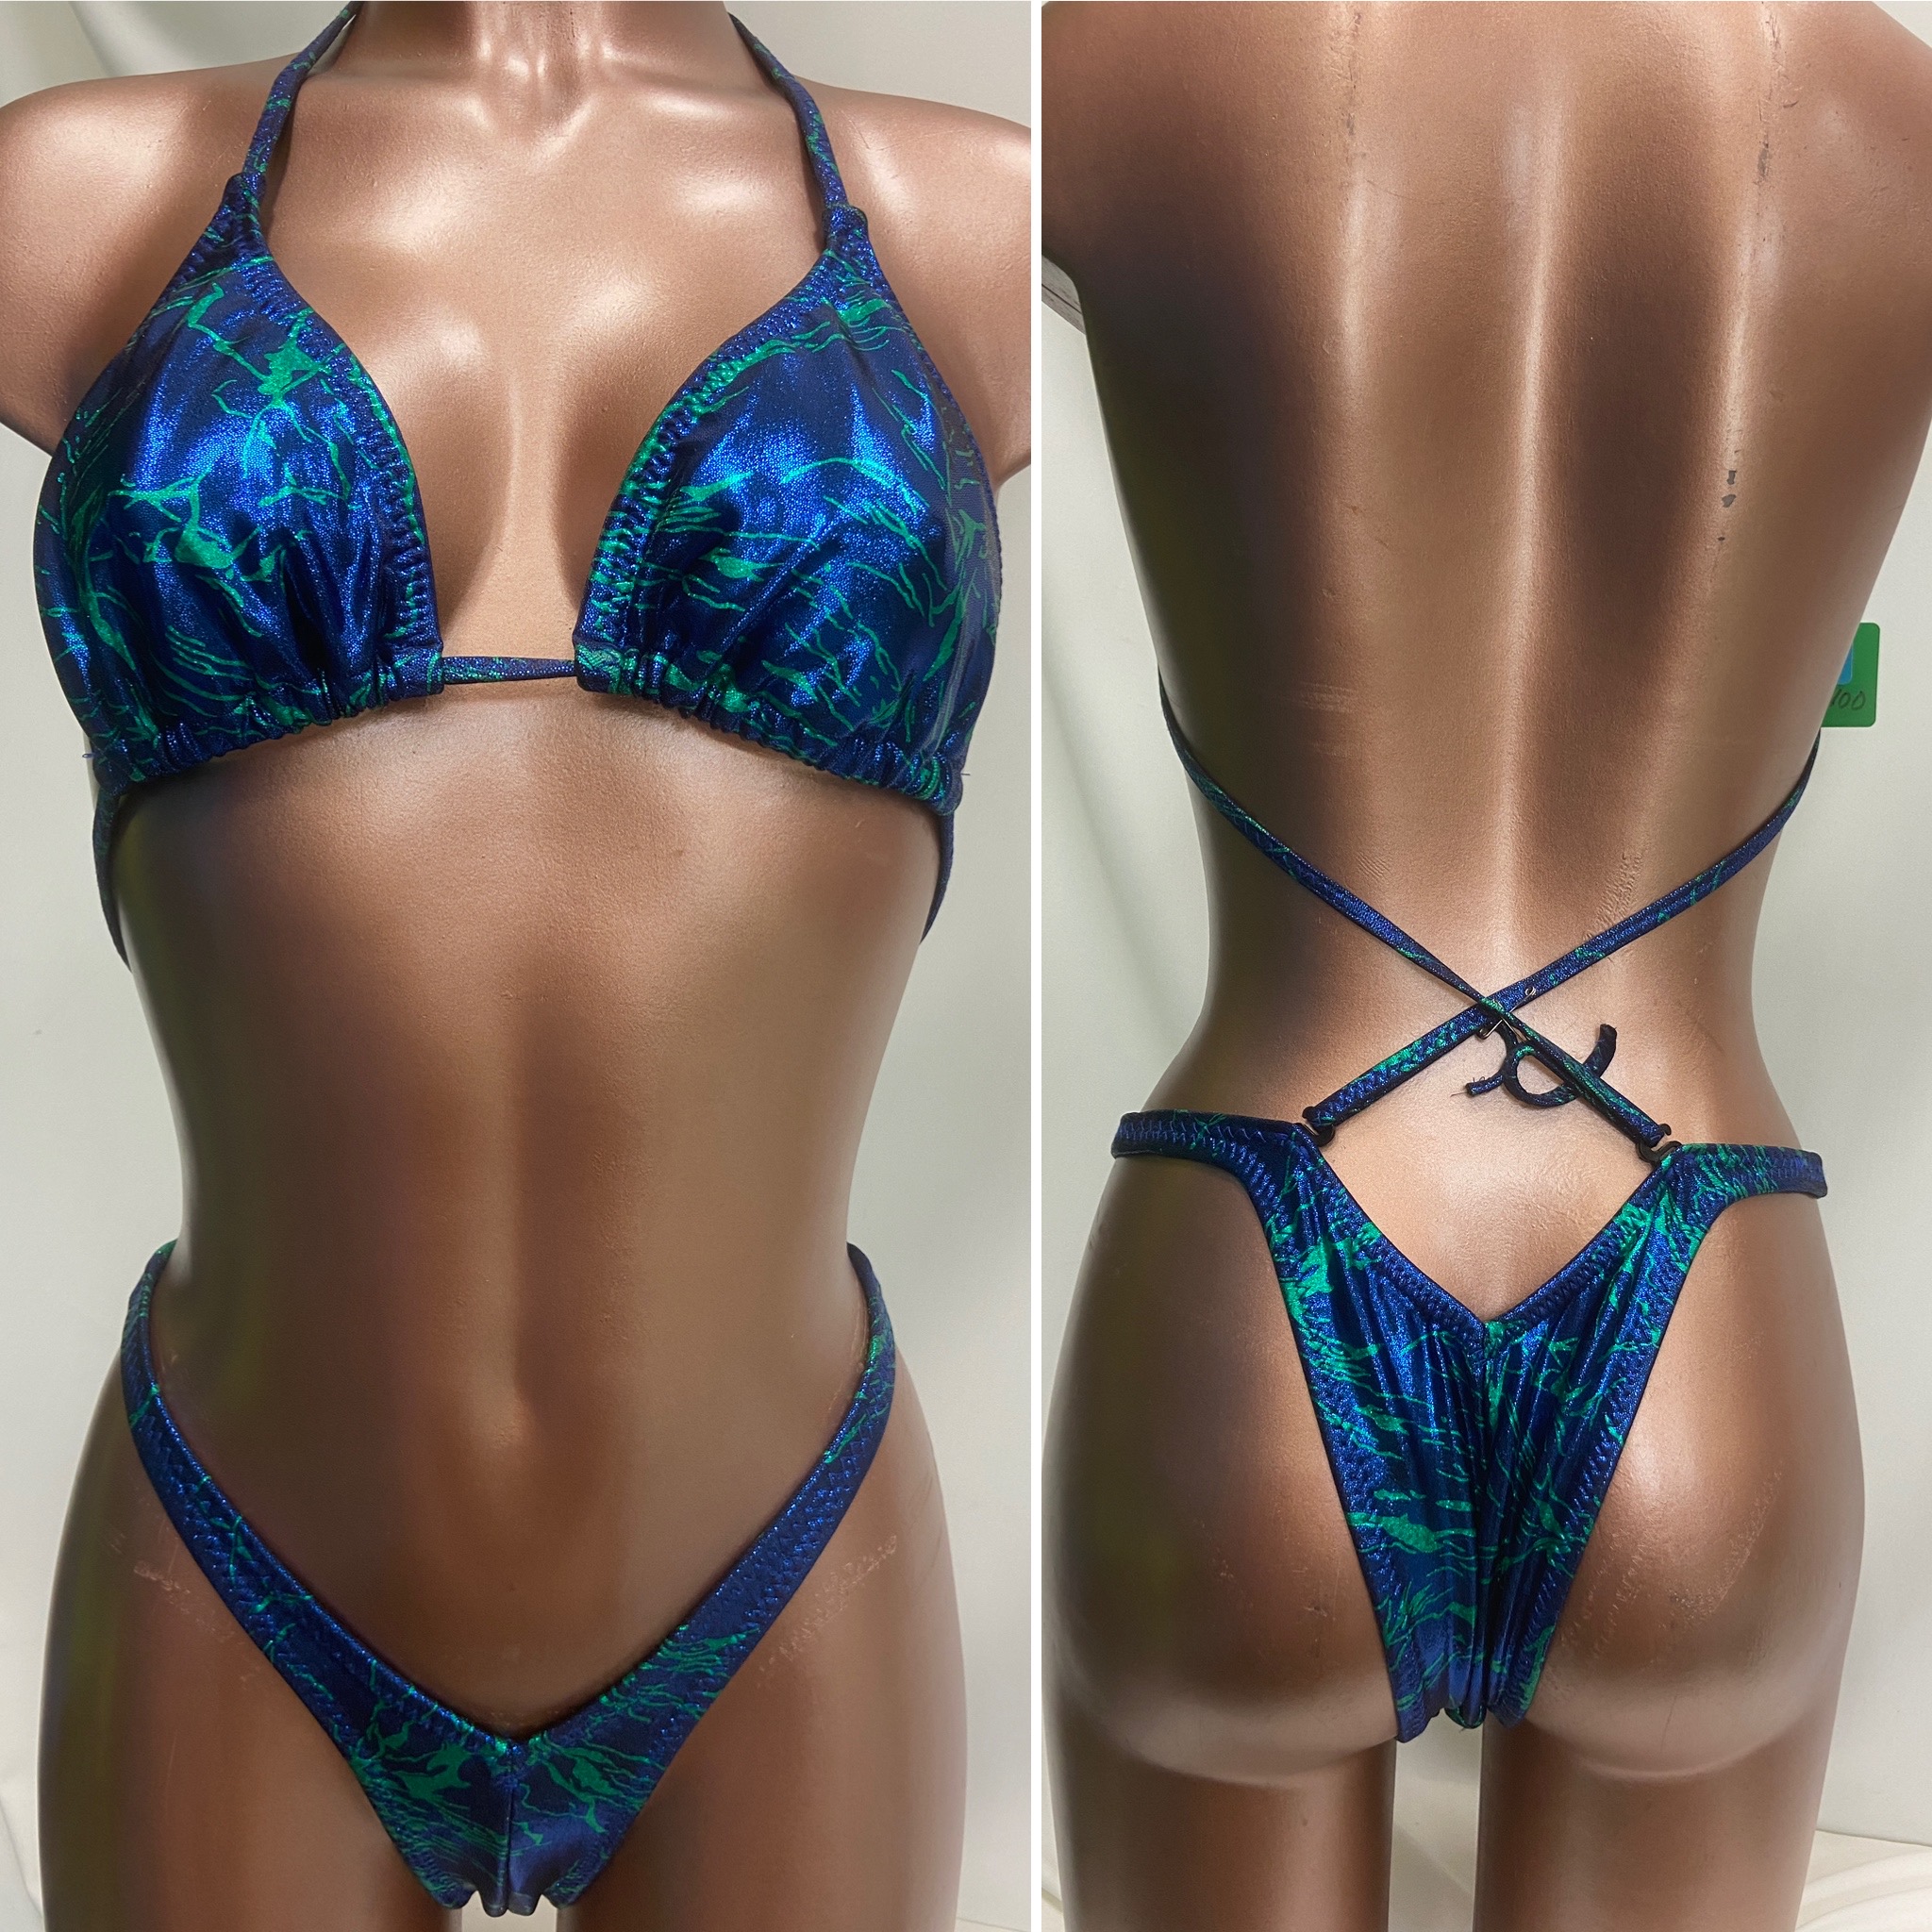 P7007
$85
C sliding top
small front, xsmall back
blue frost with green pattern